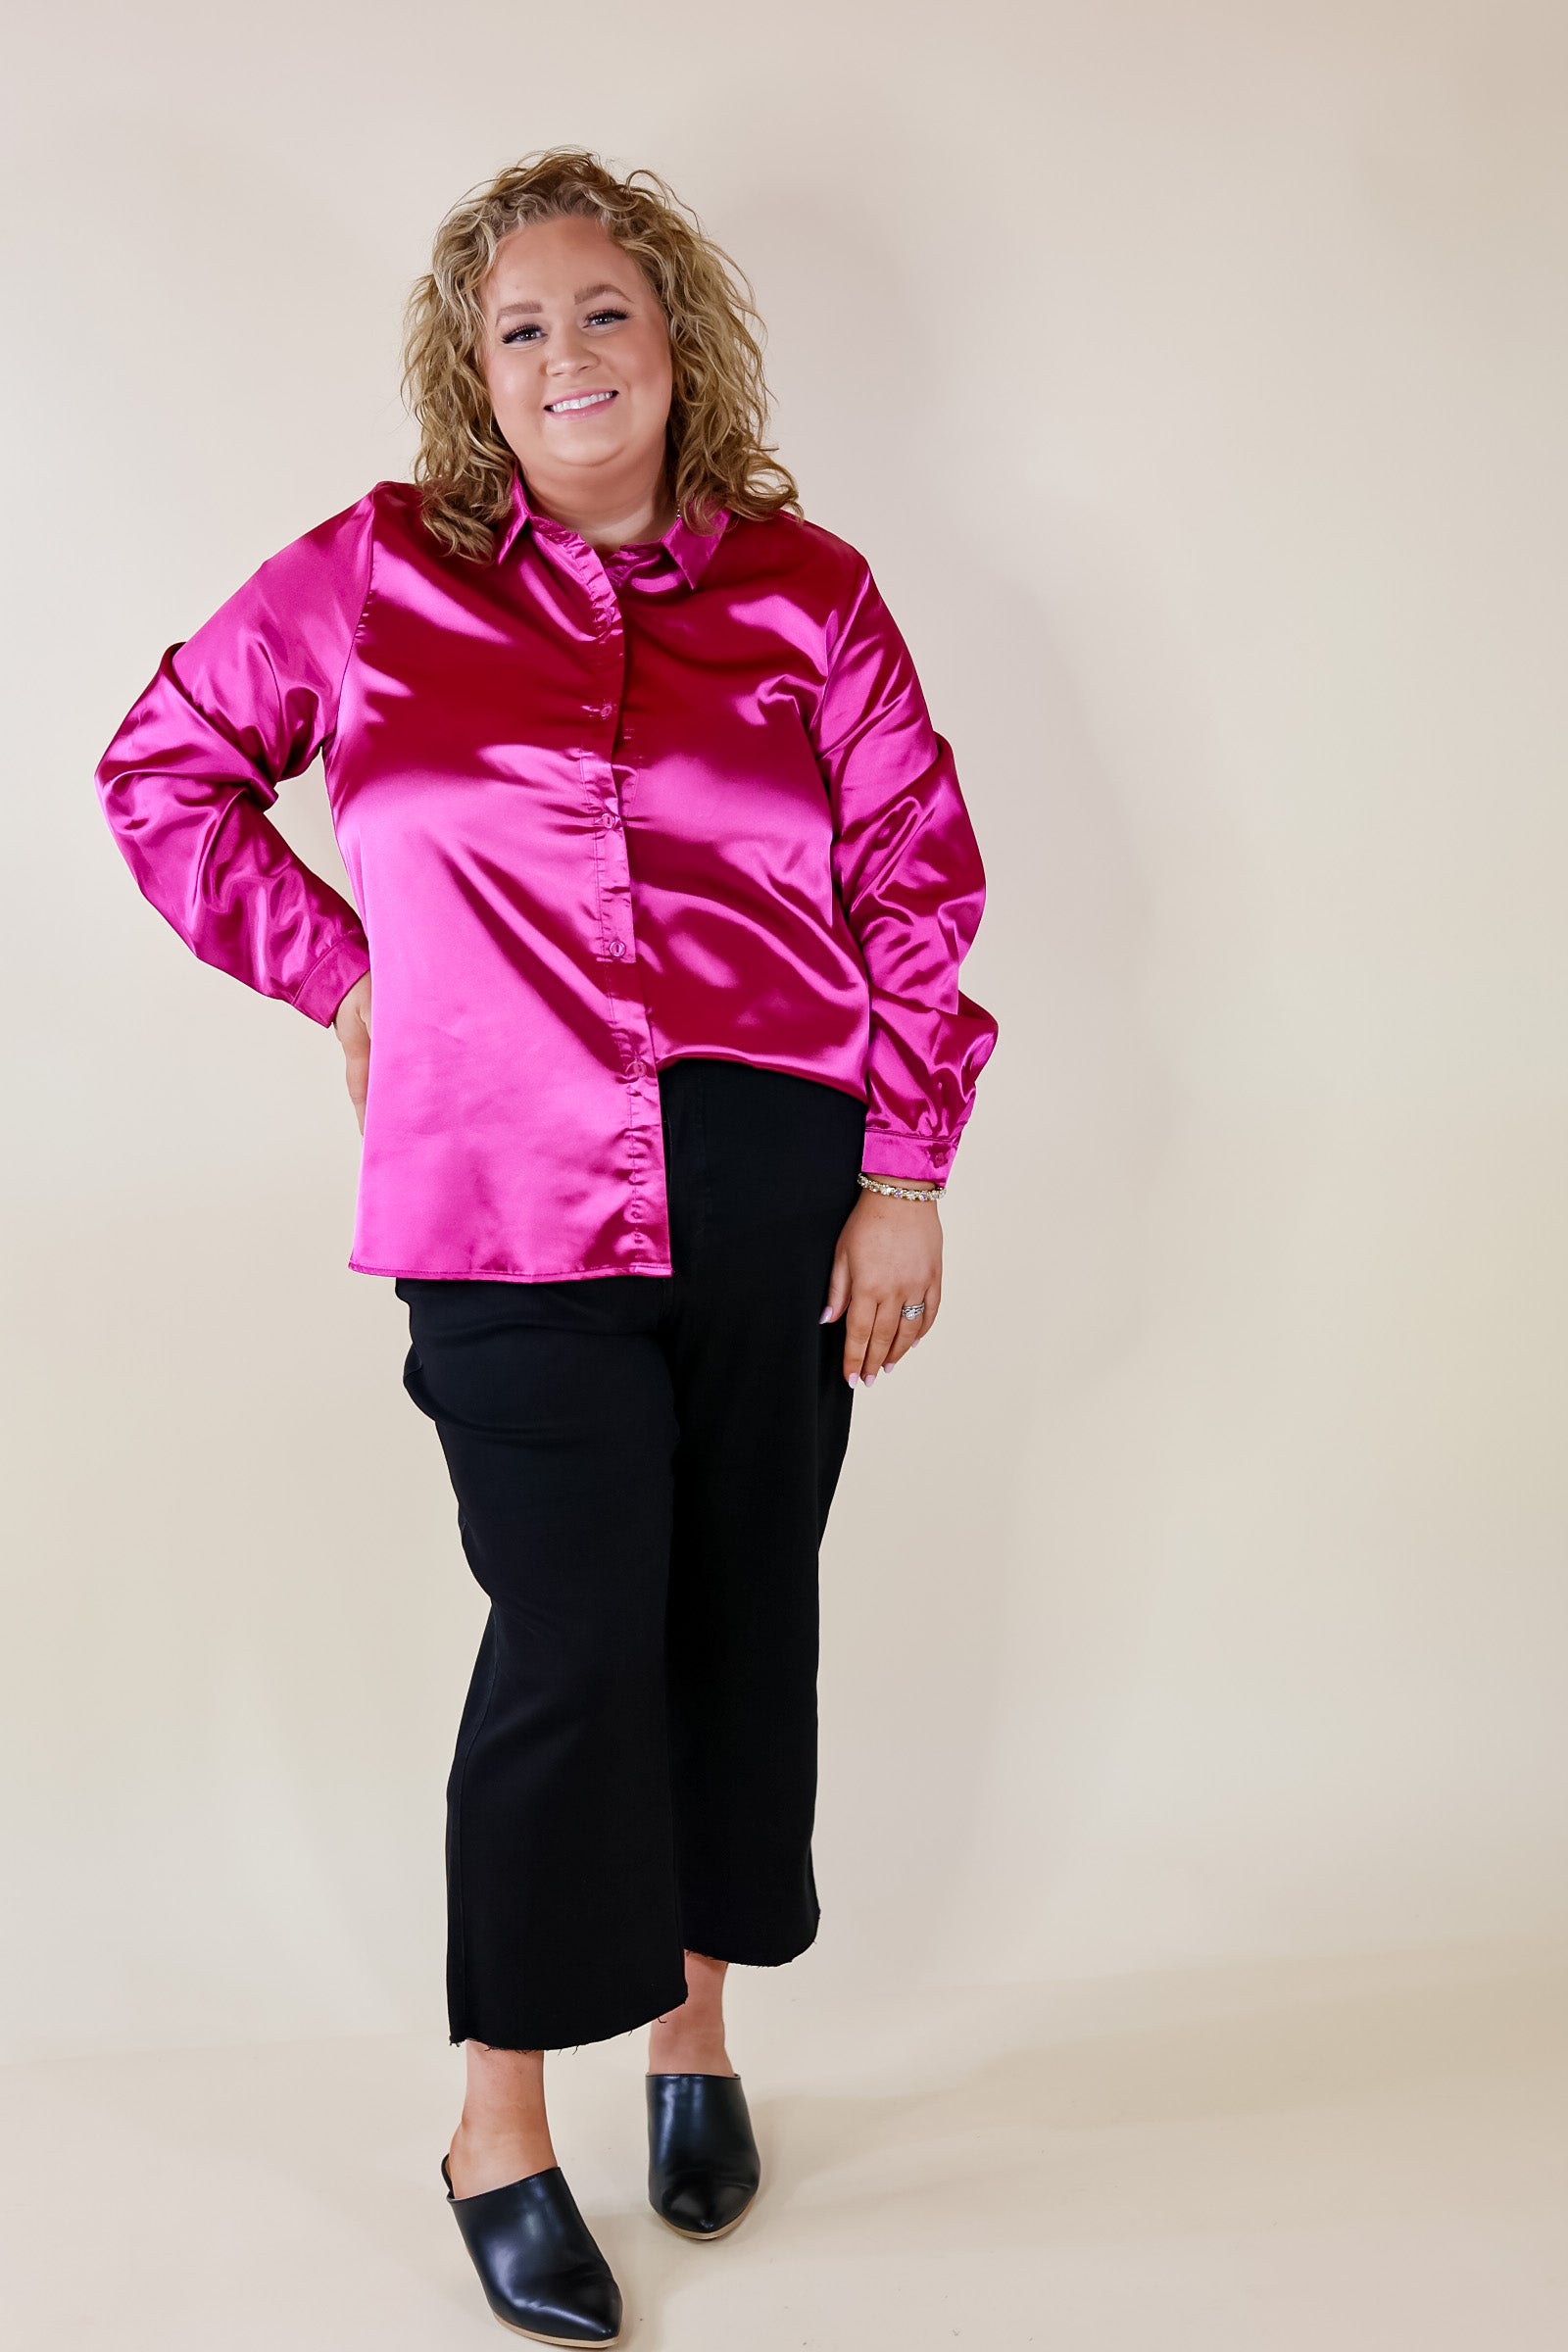 Down To Disco Satin Long Sleeve Button Up Top in Magenta - Giddy Up Glamour Boutique